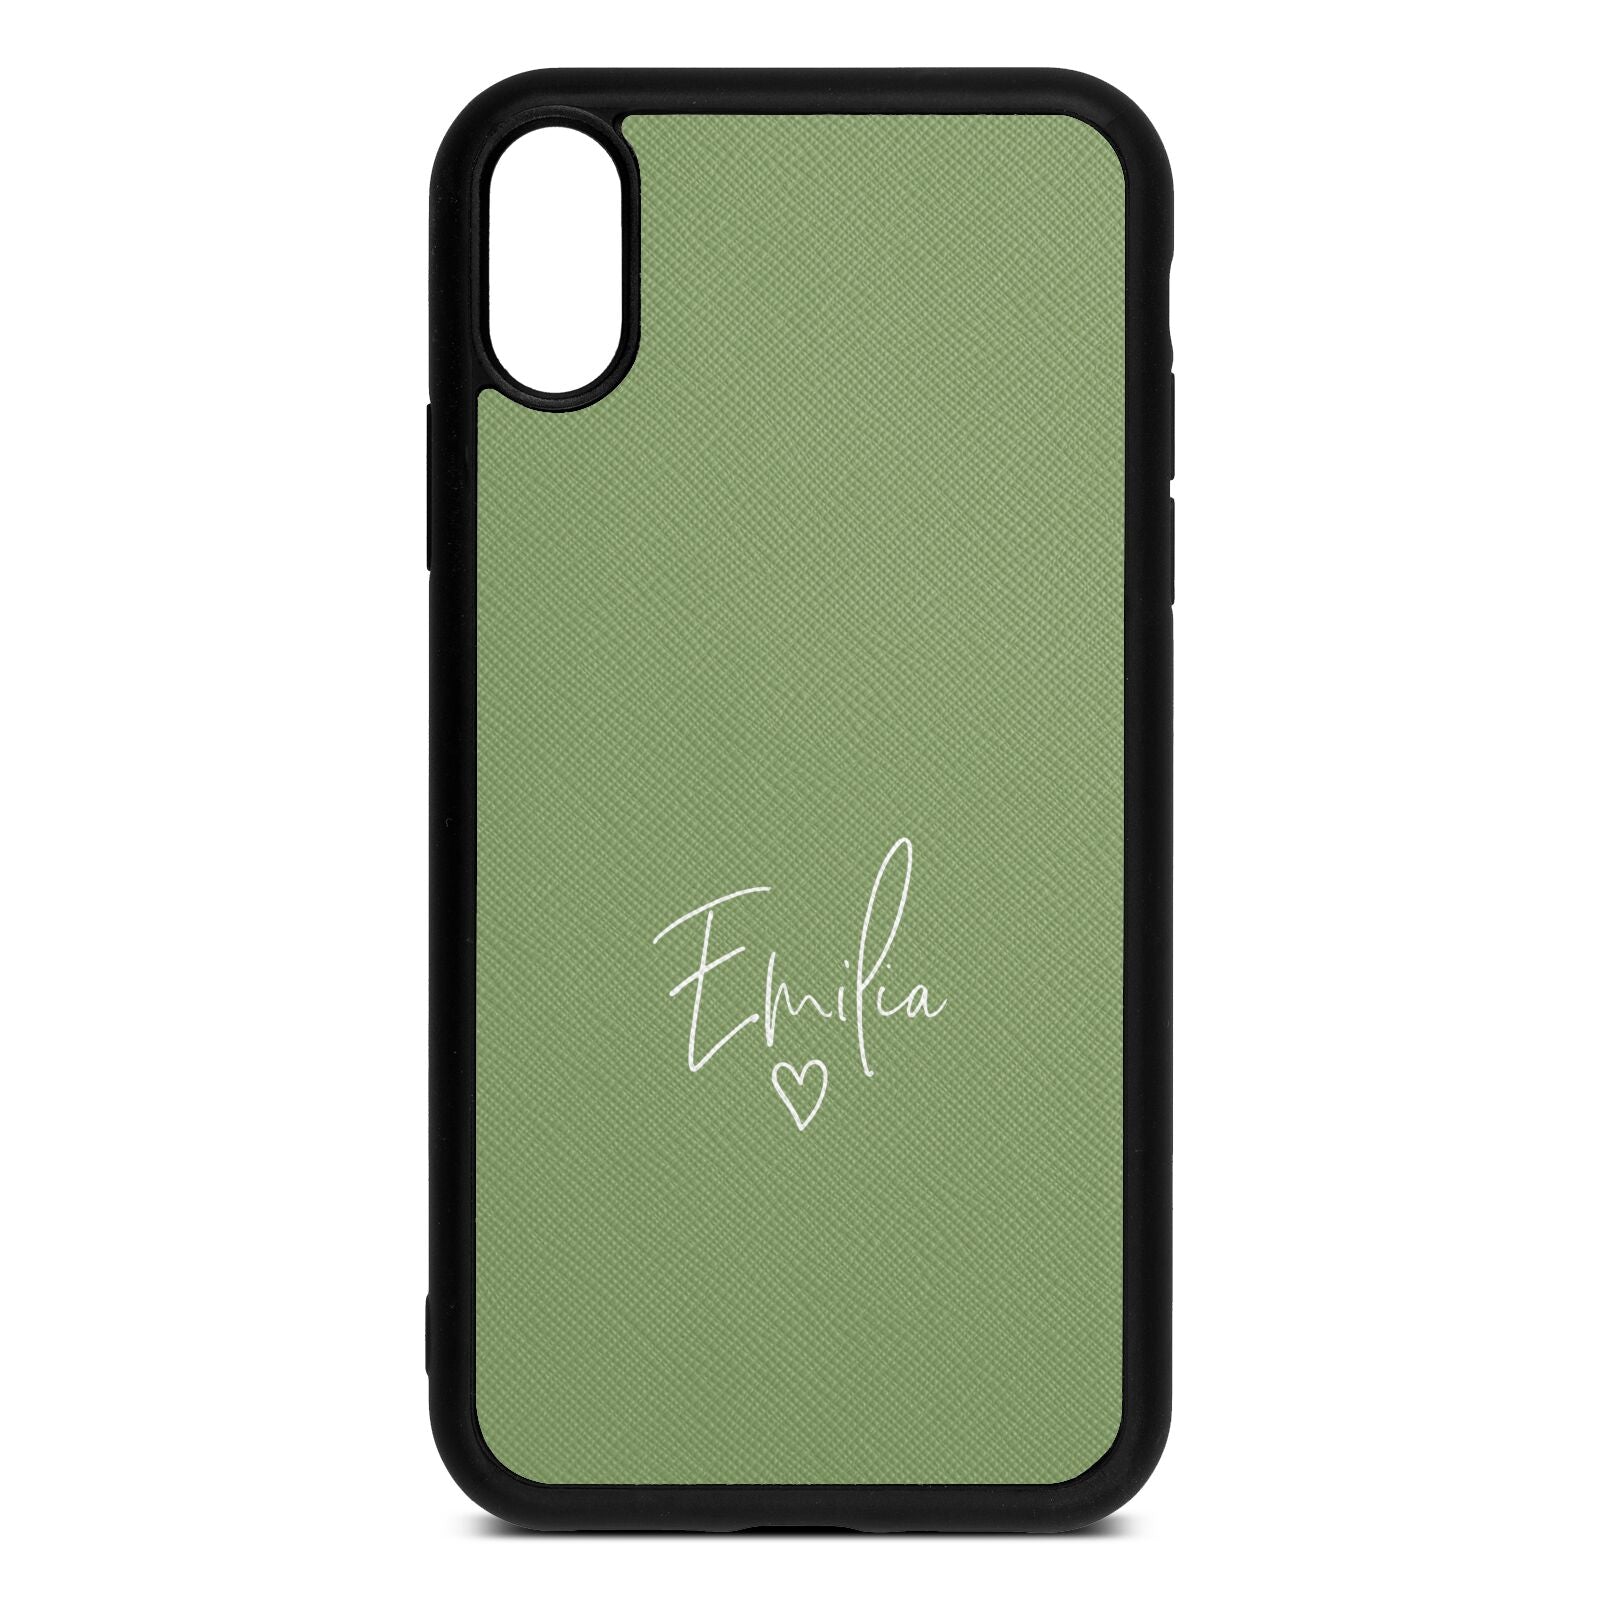 White Handwritten Name Transparent Lime Saffiano Leather iPhone Xr Case